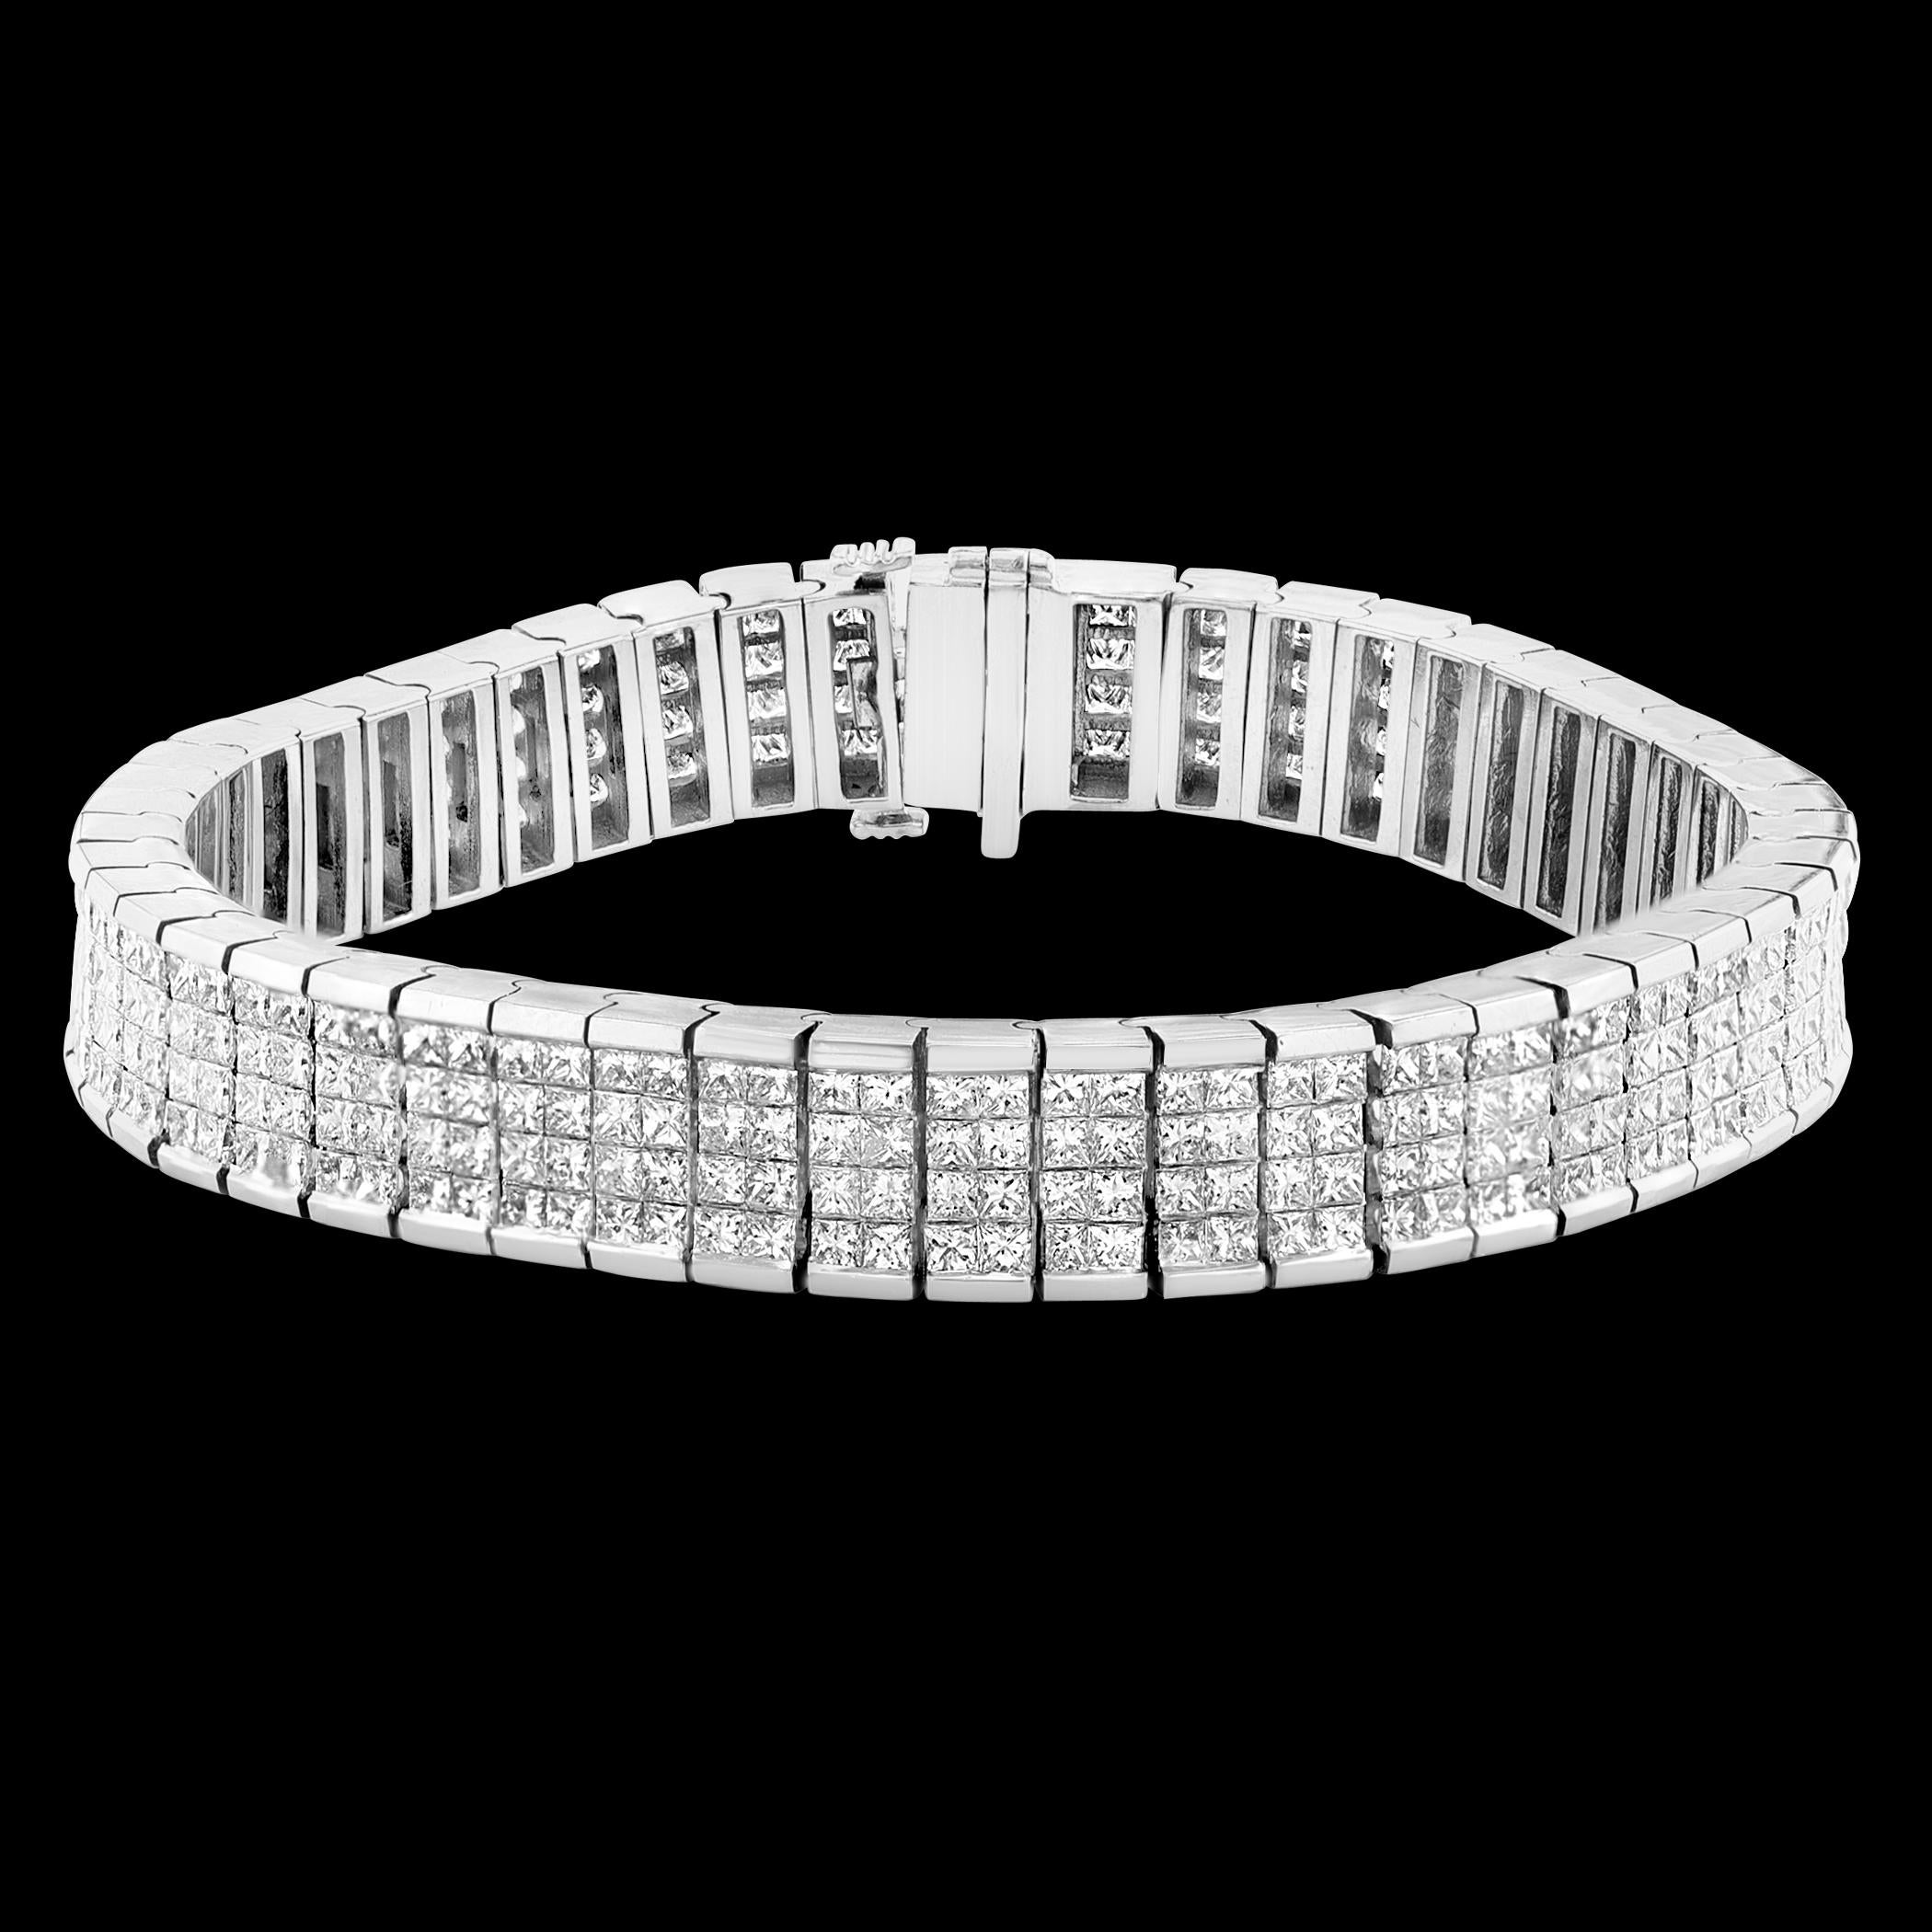 
A classic tennis bracelet on a four row diamonds of princess cut that weighs 24 Carats
WHITE, SHINNY, NATURAL DIAMONDS NO ENHANCEMENT
It measures 7.3 inches long, 9.3 mm wide, 3.95 mm thick 
This will perfectly fit a NORMAL SIZE WRIST TO MEDIUM